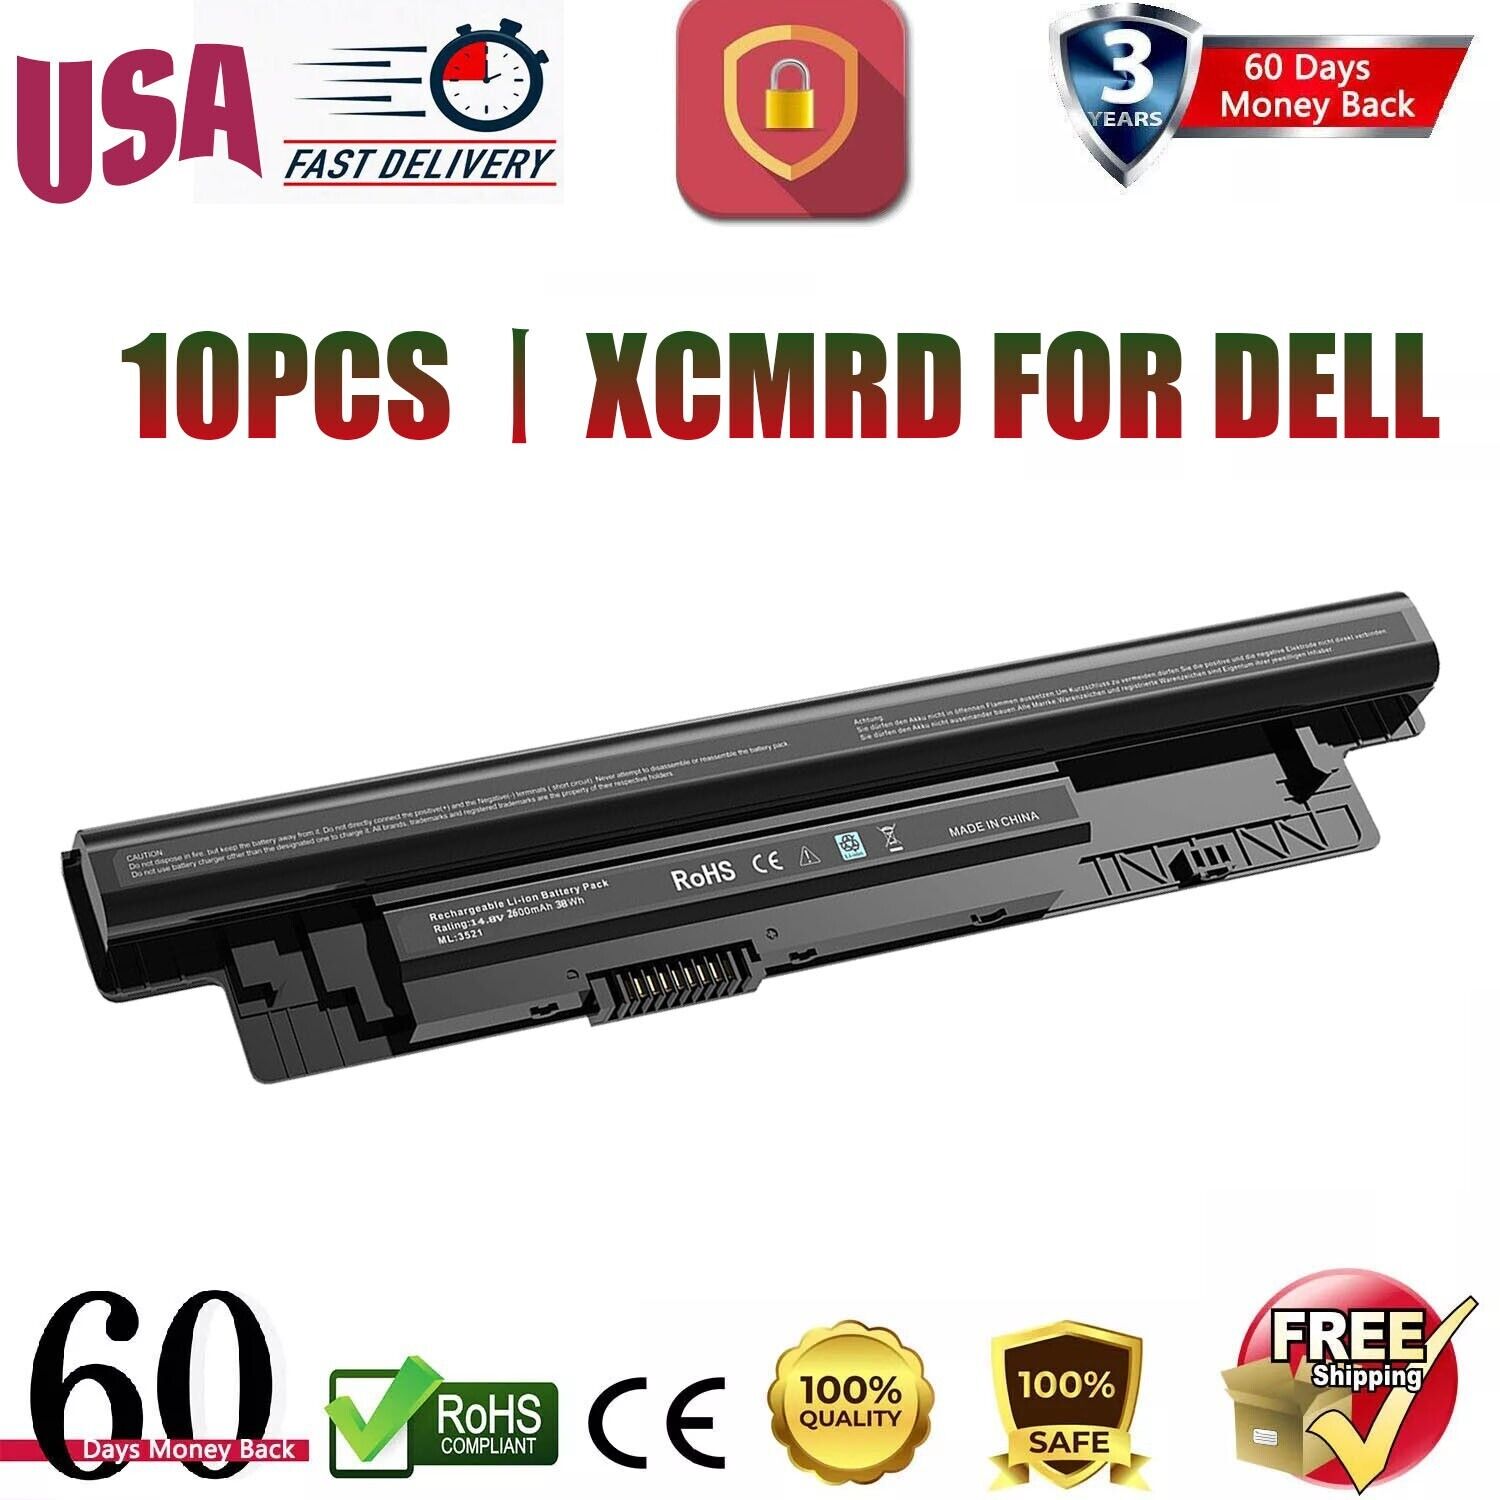 USPS 10PCS XCMRD BATTERY FOR DELL Inspiron 3531 3541 3542 3543 3421 3437 3443